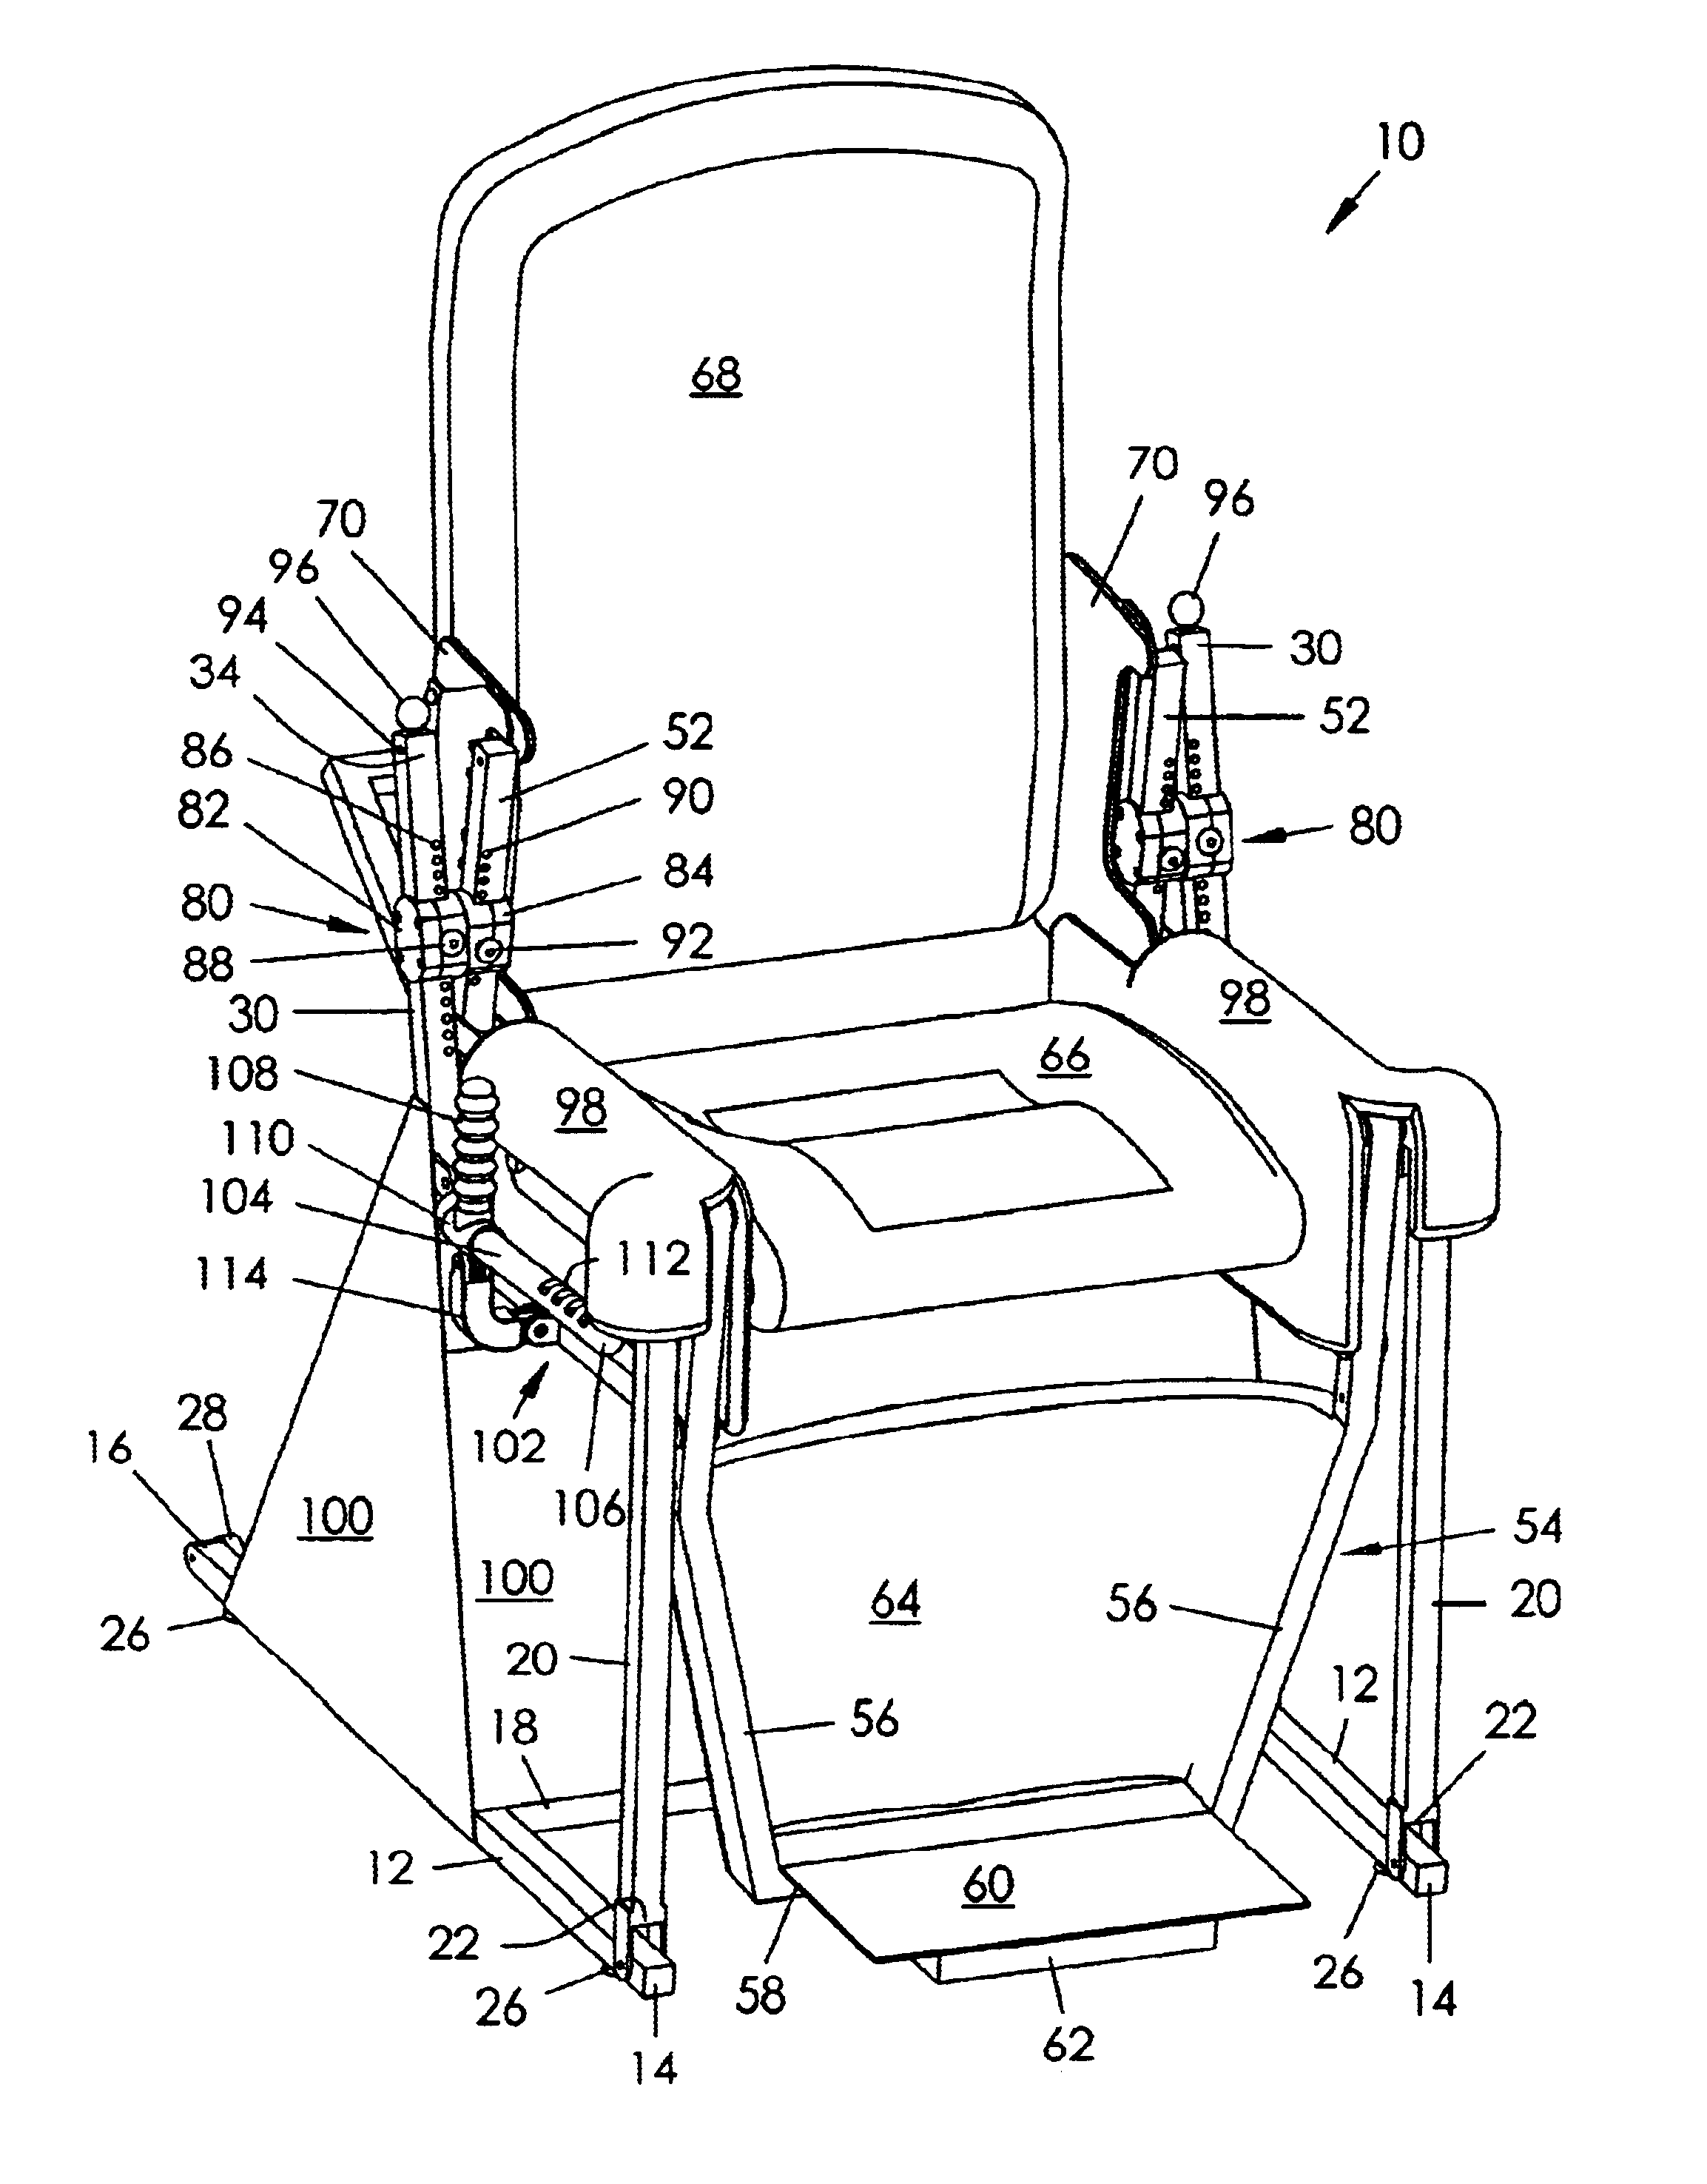 Low-resistance exercise and rehabilitation chair